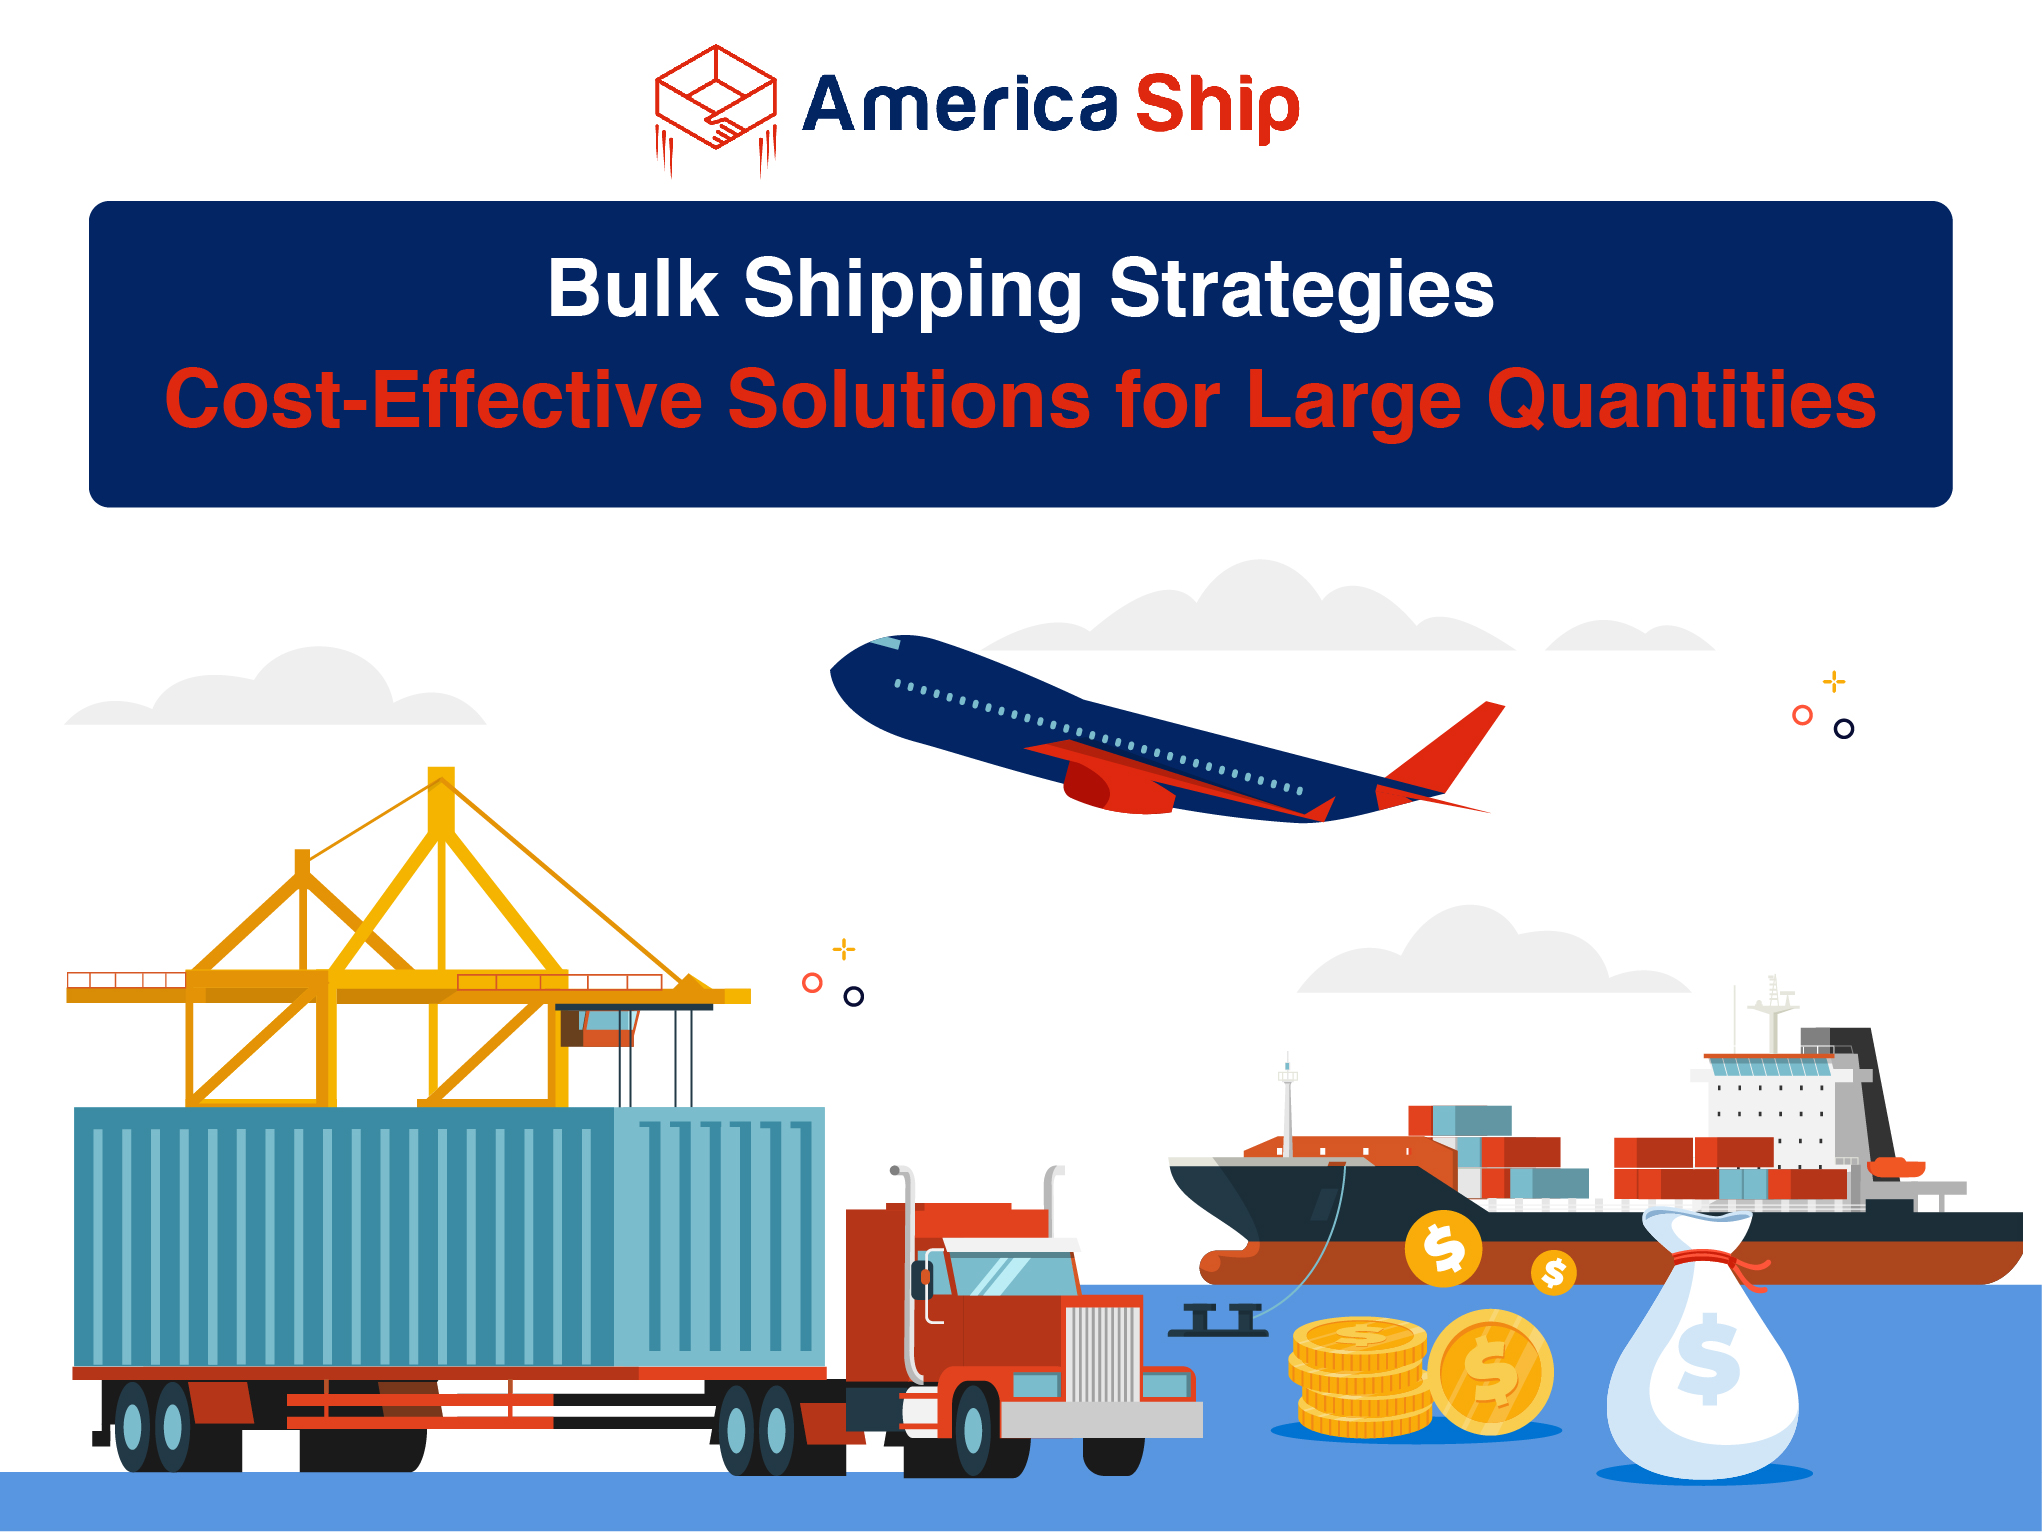 Bulk Shipping Strategies: Cost-Effective Solutions for Large Quantities